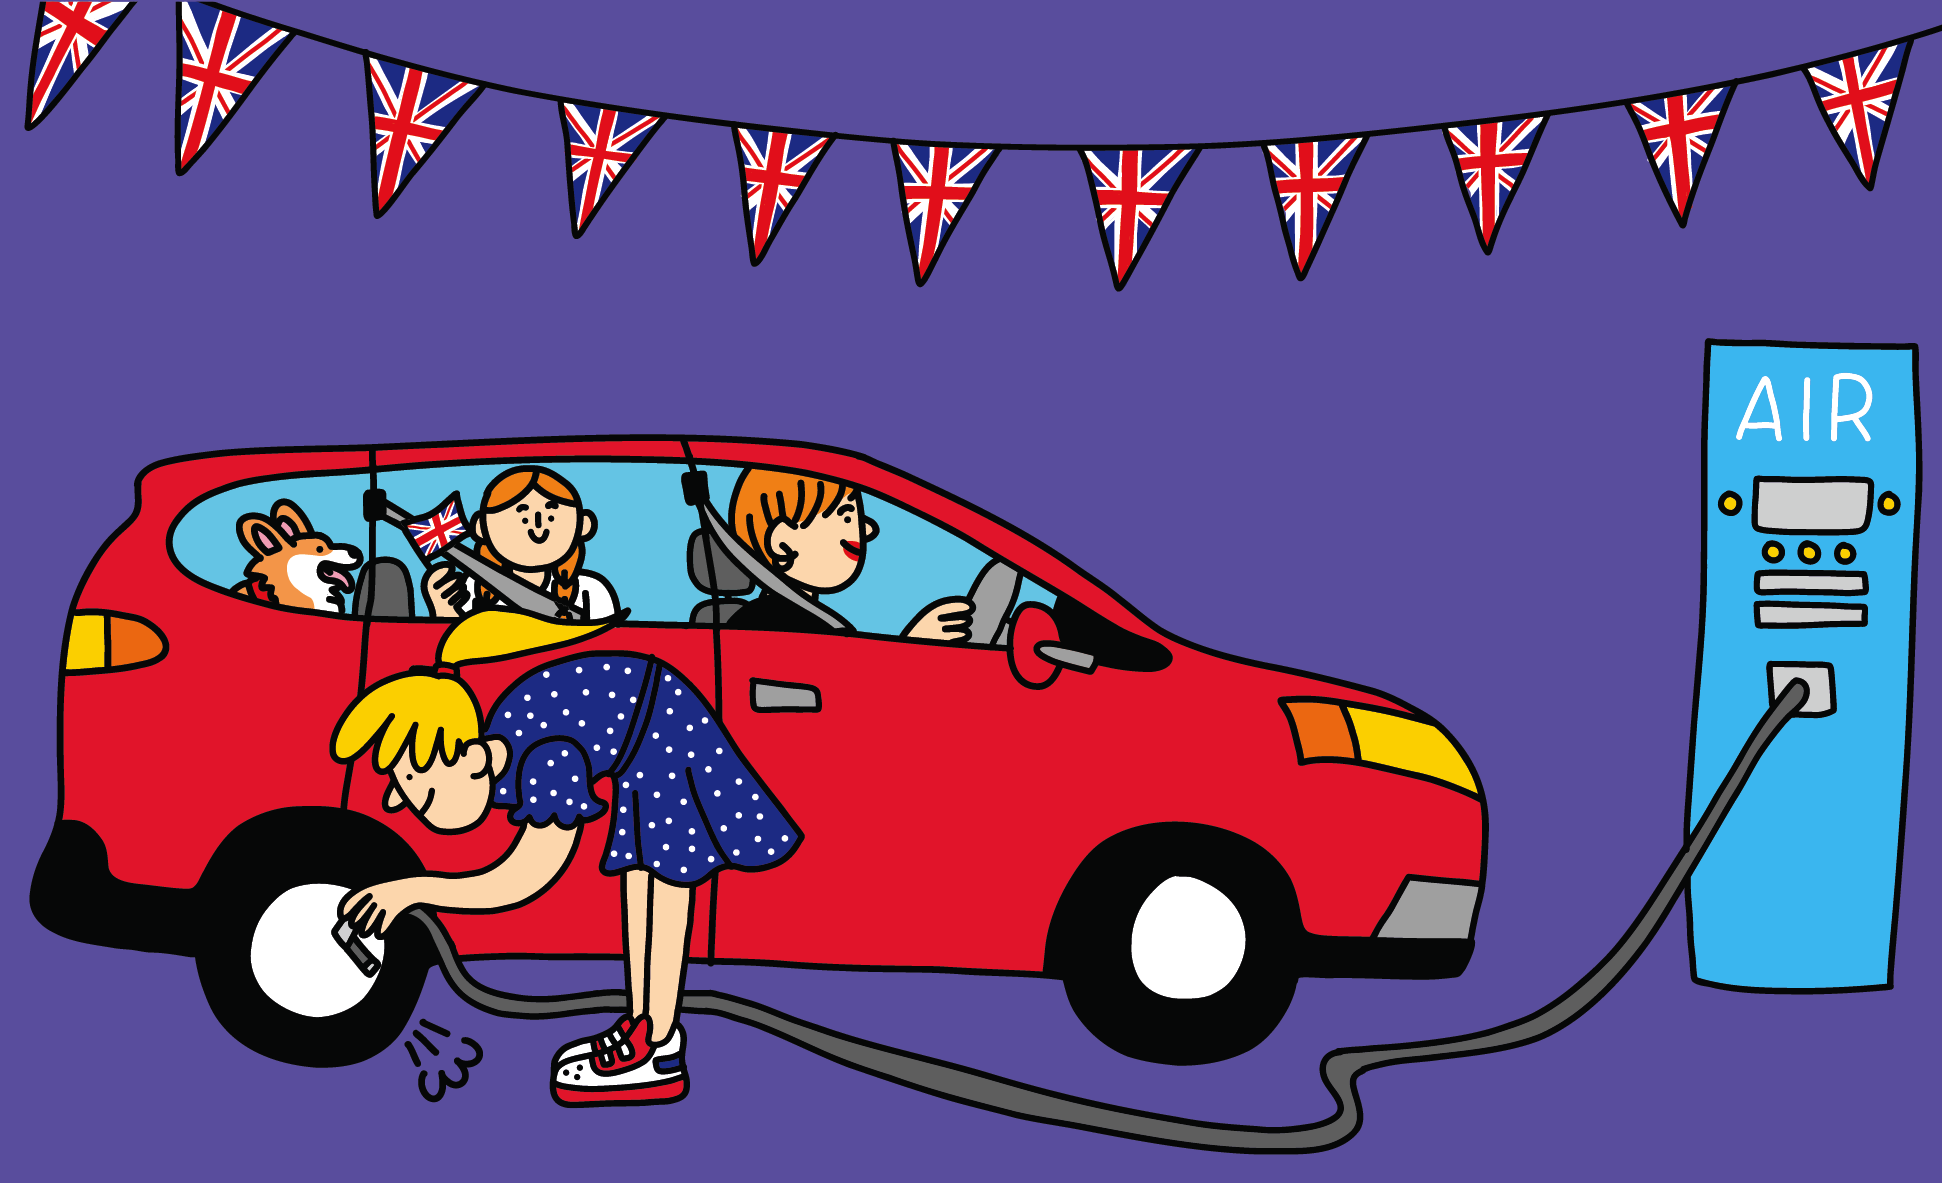 its the queens Jubilee remember to check your tires before you travel